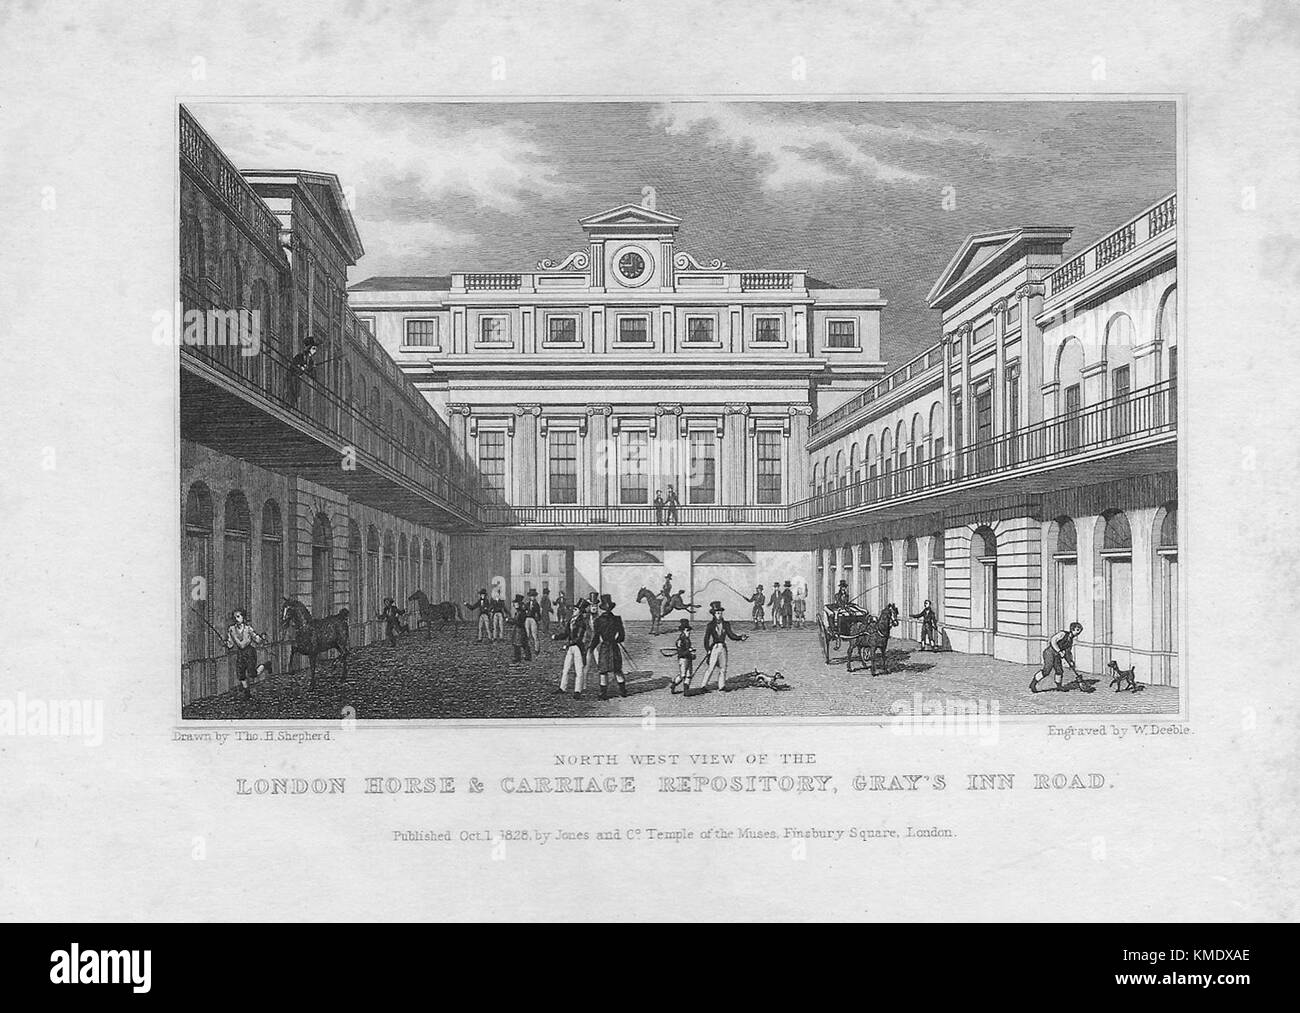 North West view London Horse & Carriage Repository, Gray's Inn Road, engraving 'Metropolitan Improvements, or London in the Nineteenth Century' London, England, UK 1828 Stock Photo